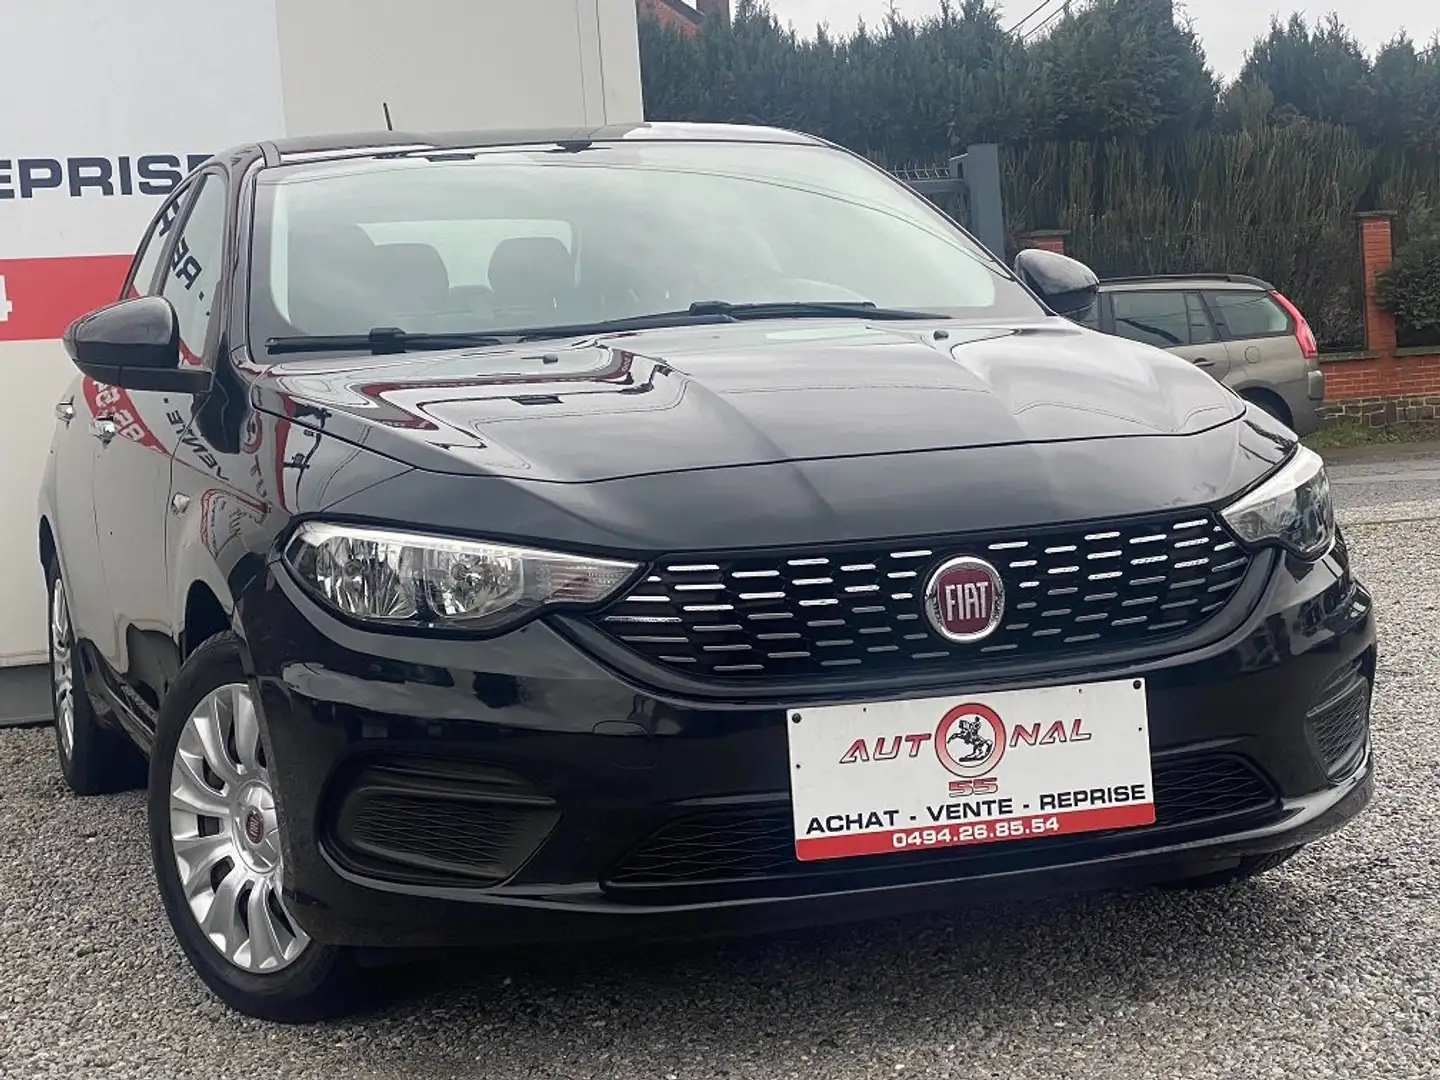 Fiat Tipo 1.4i 95CH*1°PROPRIETAIRE*CARNET*GPS*PDC*CLIM Negro - 2